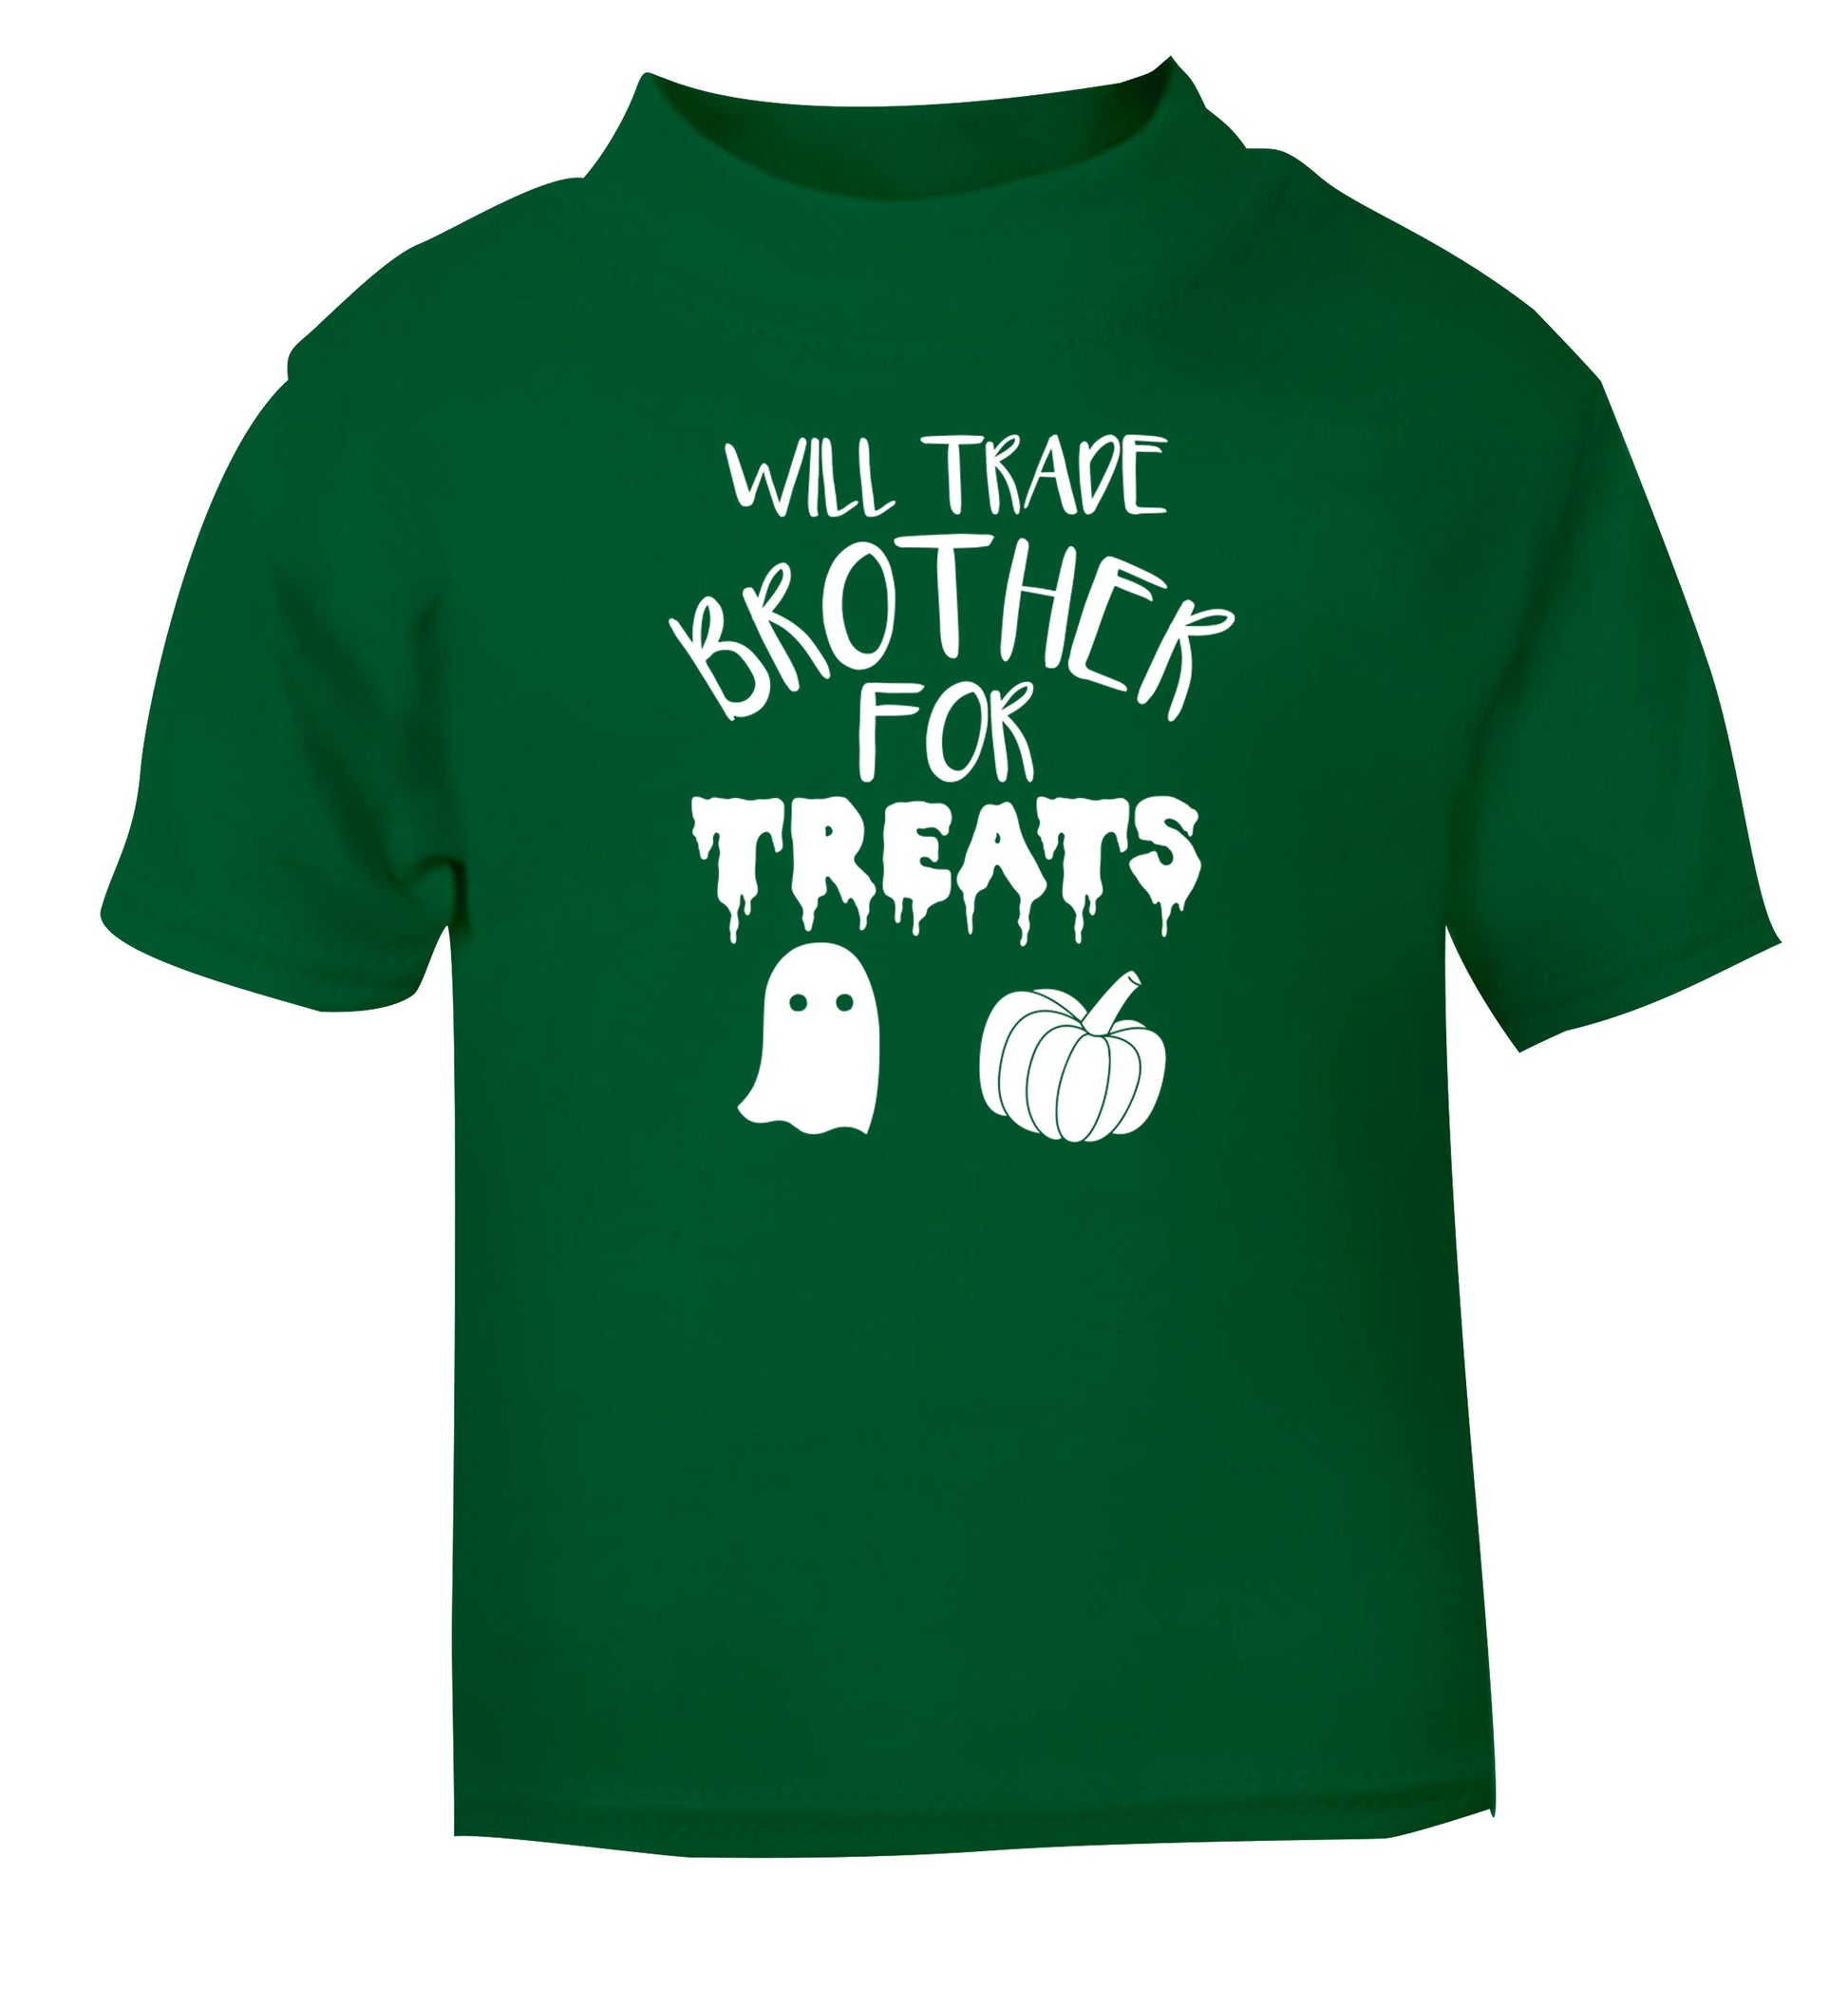 Will trade brother for treats green Baby Toddler Tshirt 2 Years